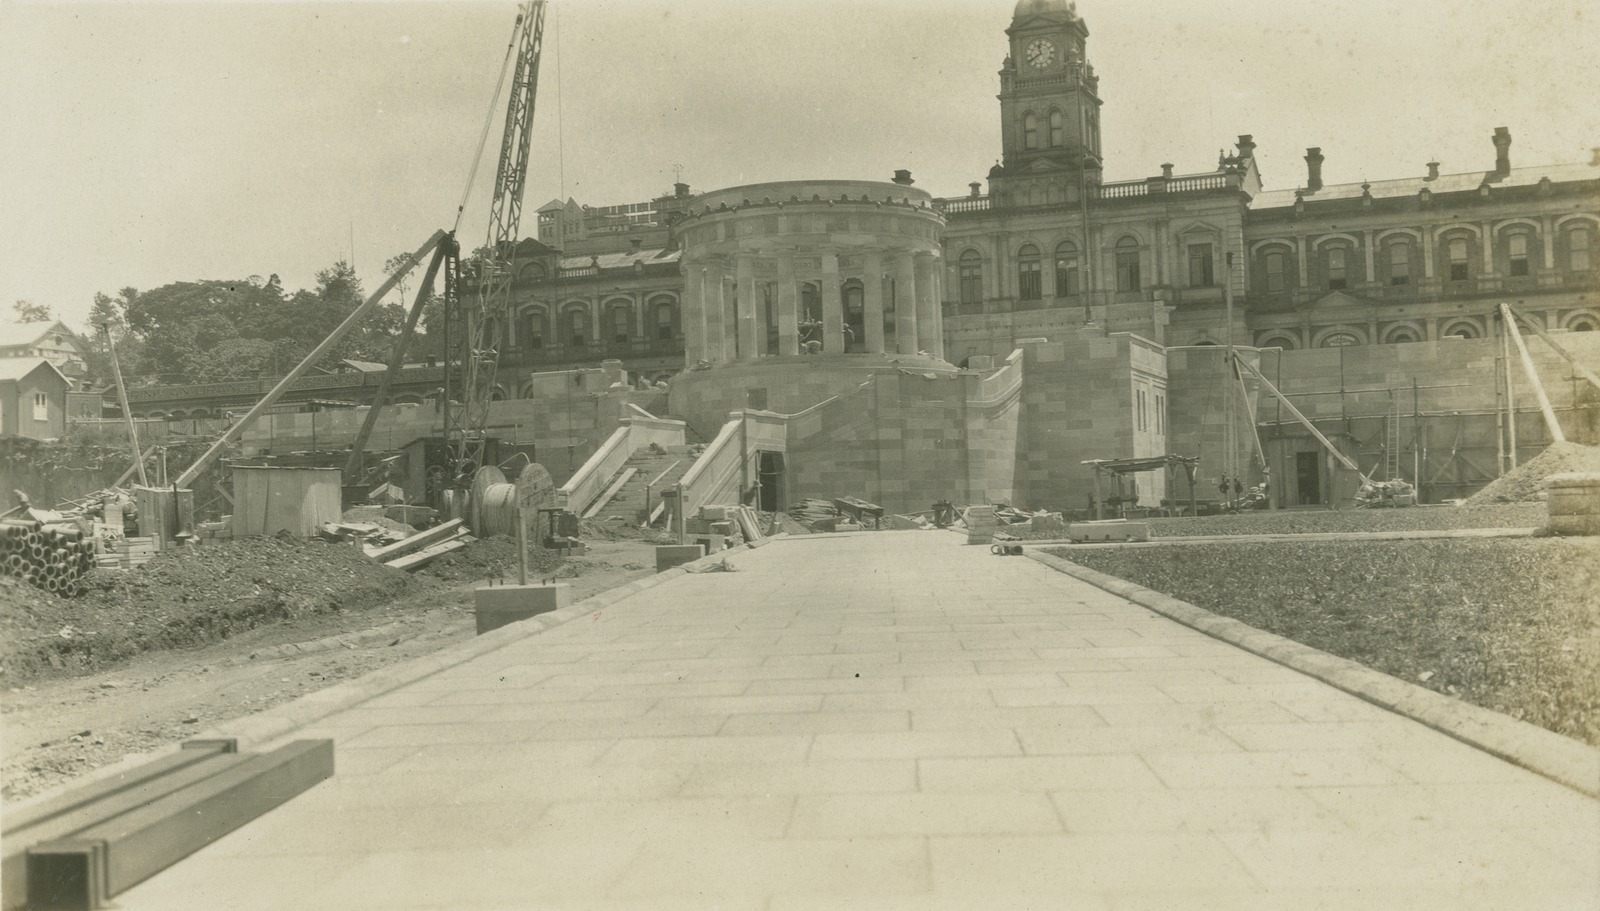 Old photographs of the construction of Anzac Memorial and surrounding square. The Shrine of Remembrance is in the centre with cranes and equipment on the side.